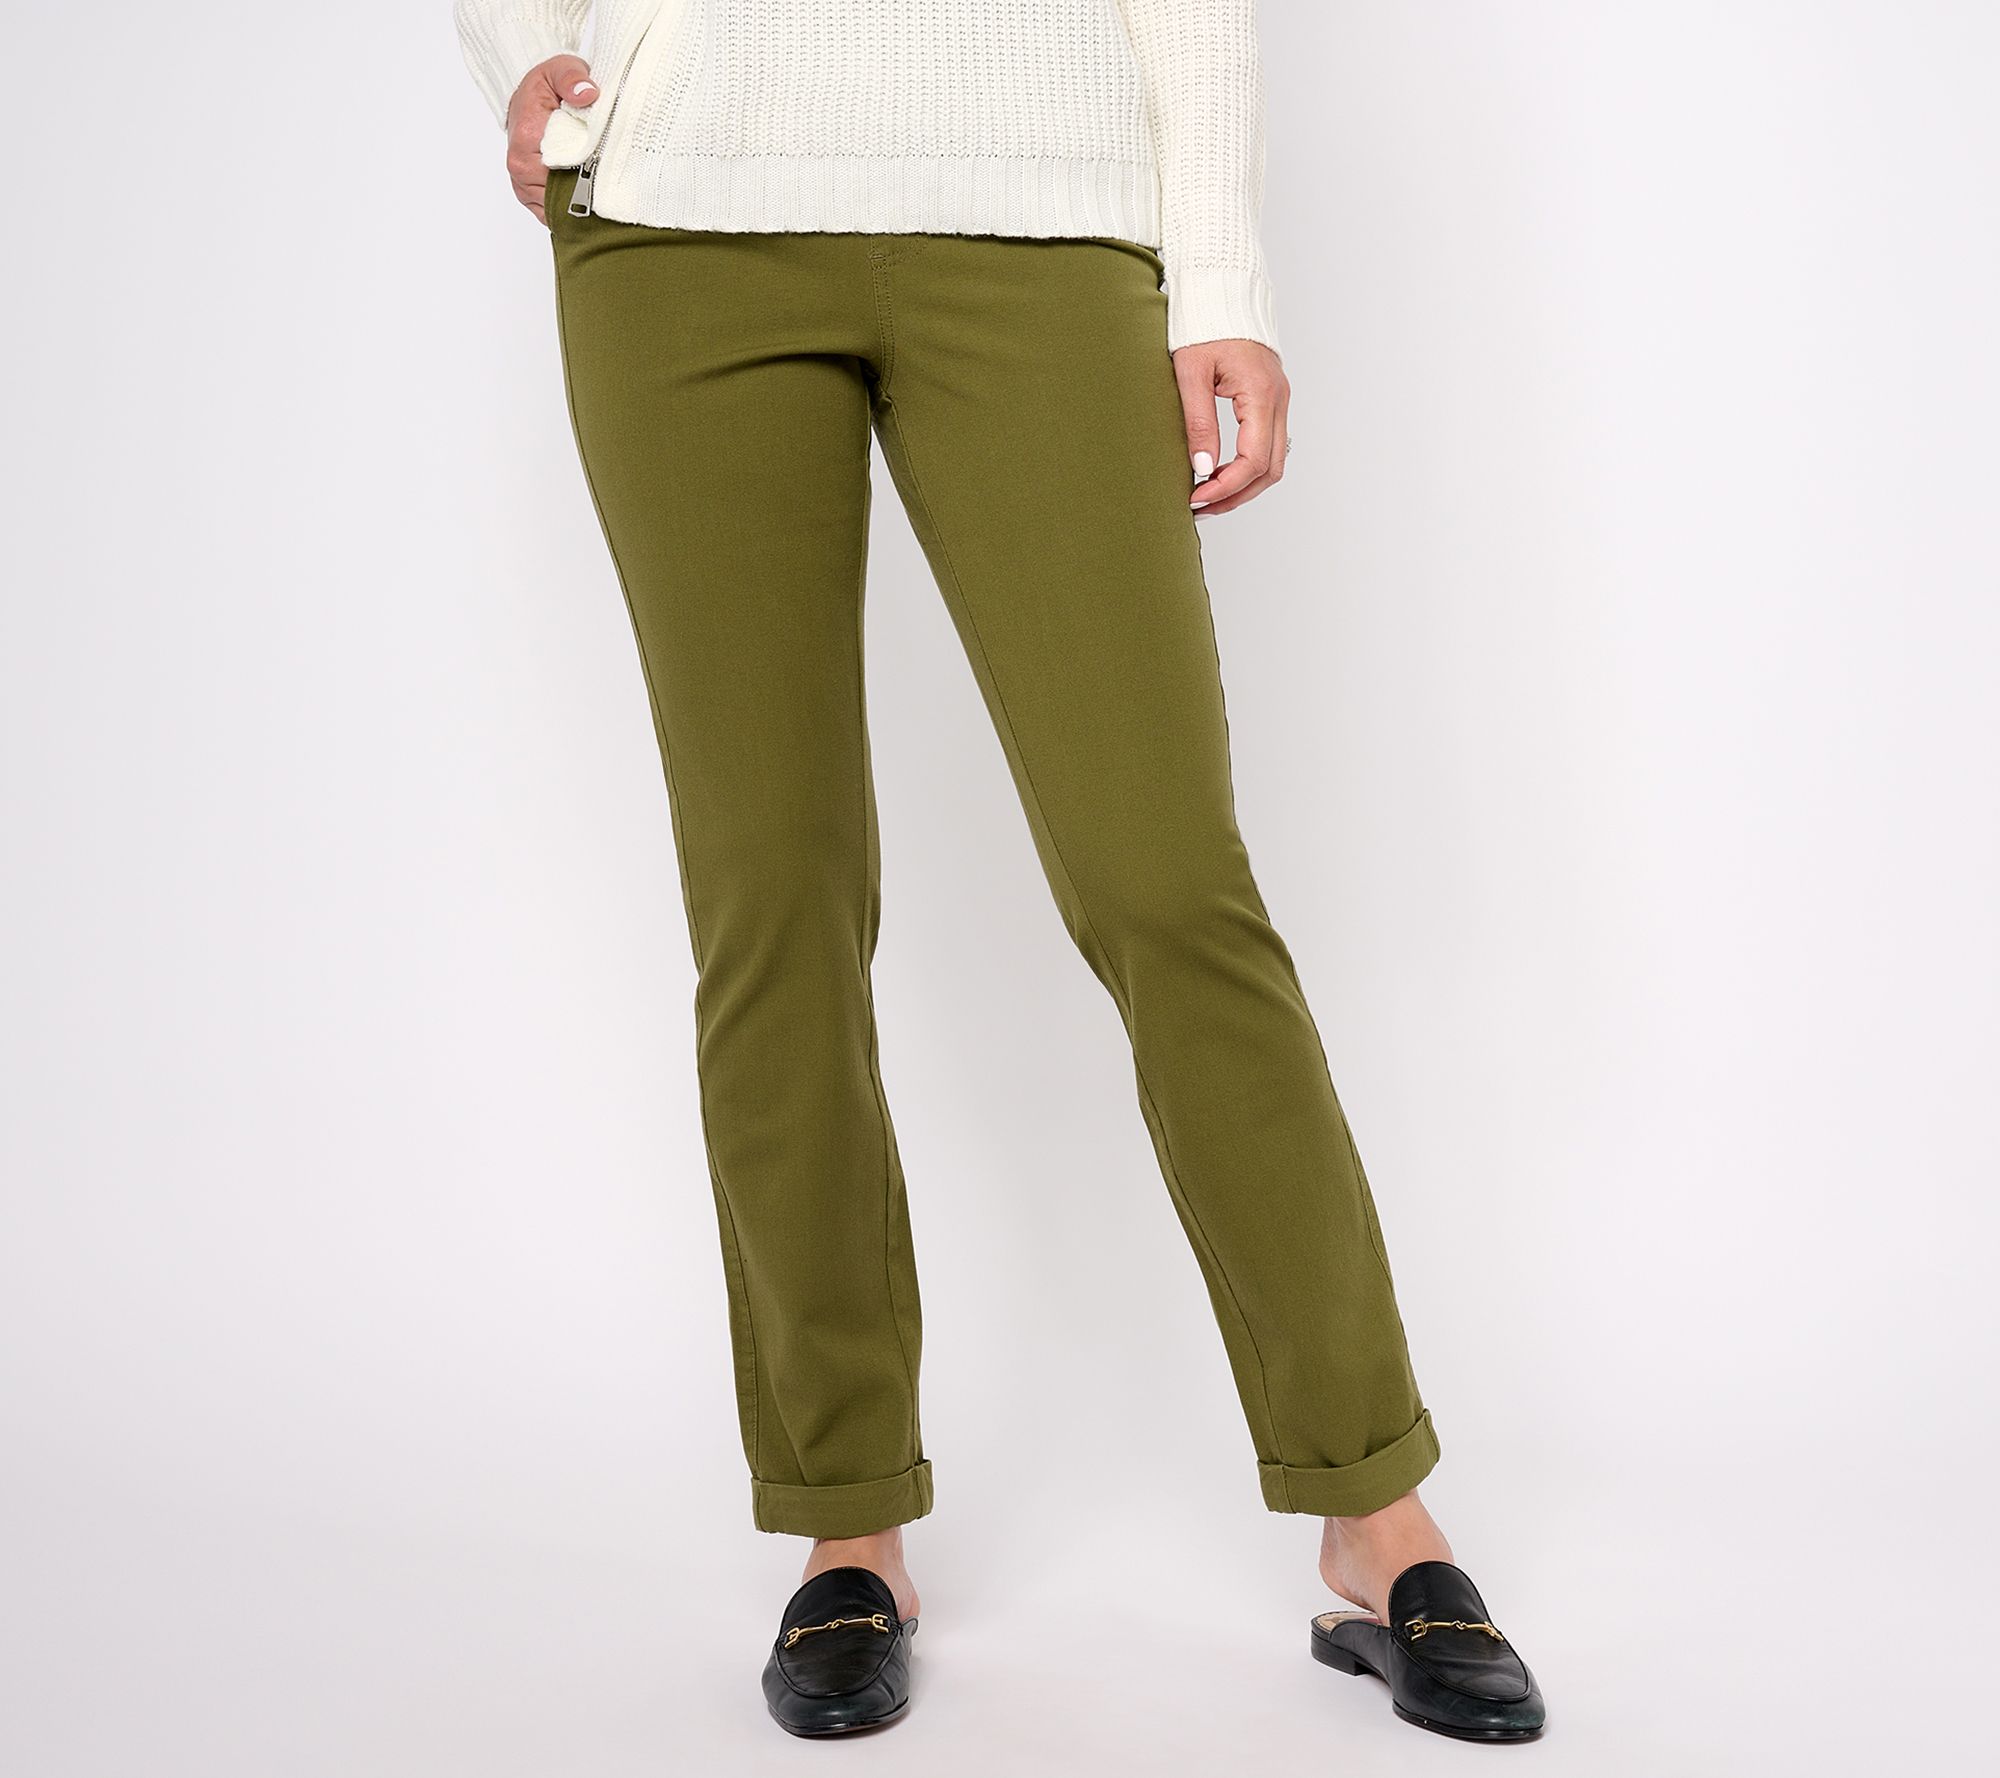 AnyBody Petite Pull-On All-Stretch Twill Pant w/ Pockets 